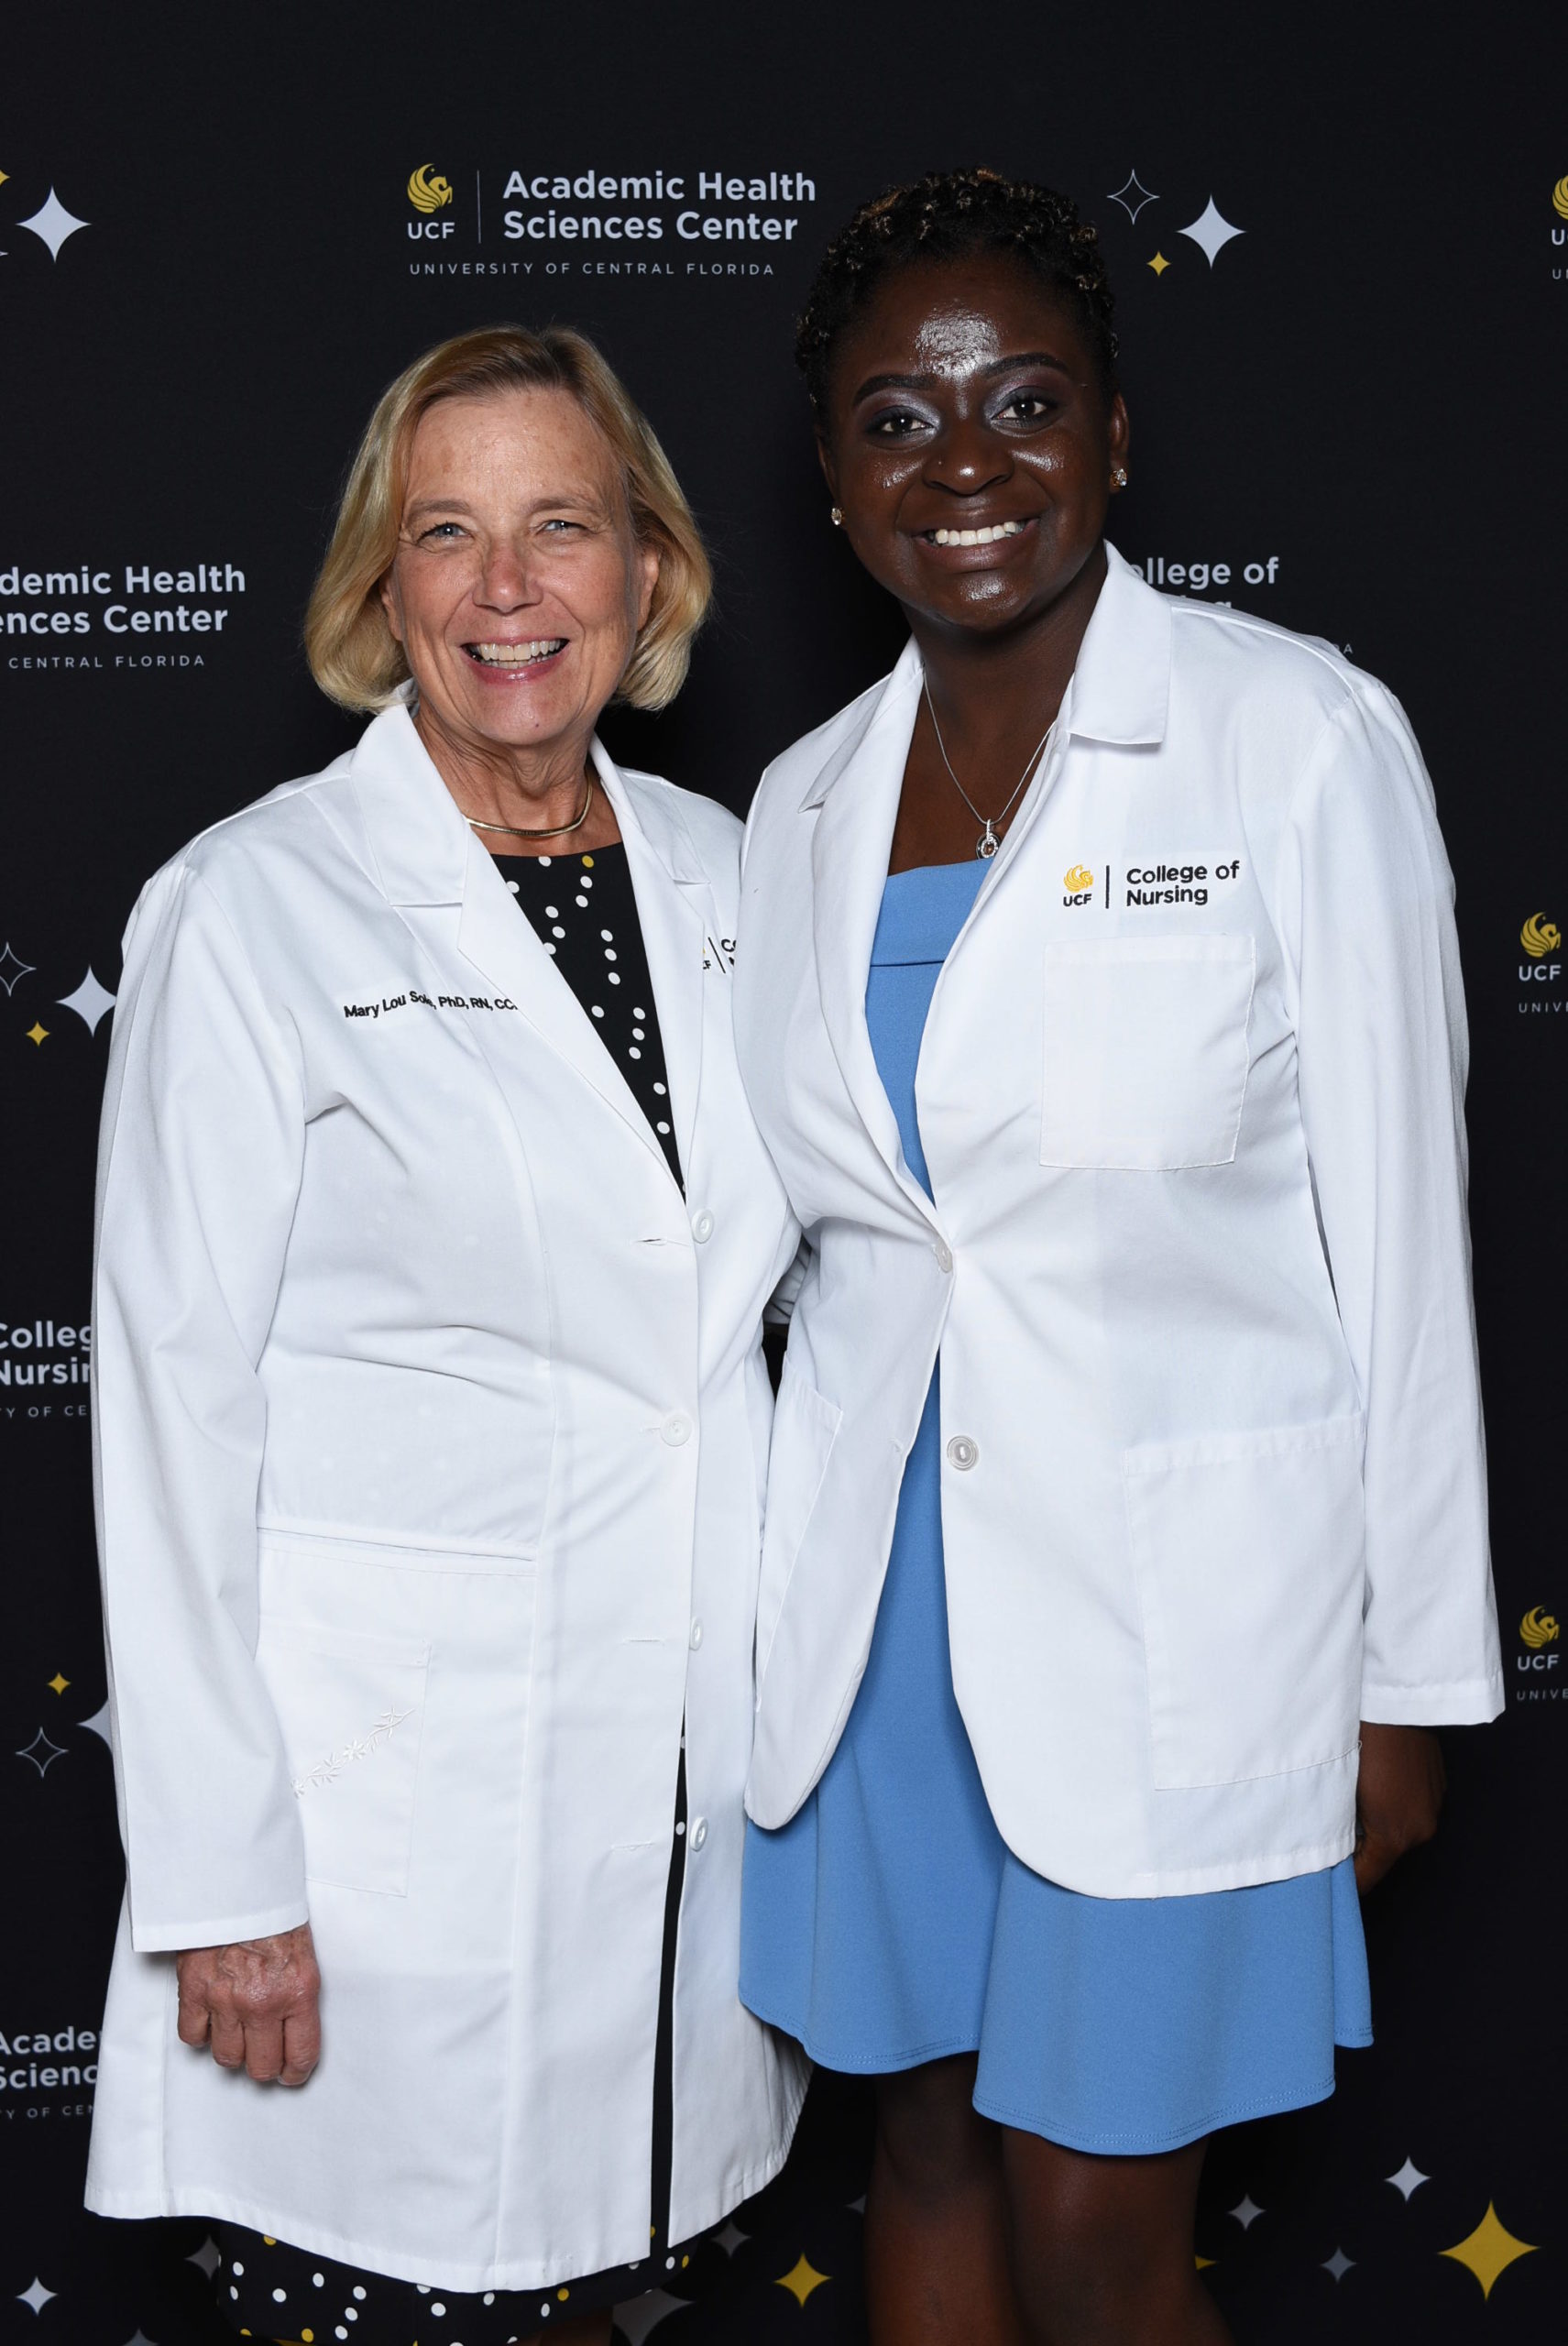 Josee Etienne, Senior BSN Student, UCF College of Nursing, with Dean Mary Lou Sole